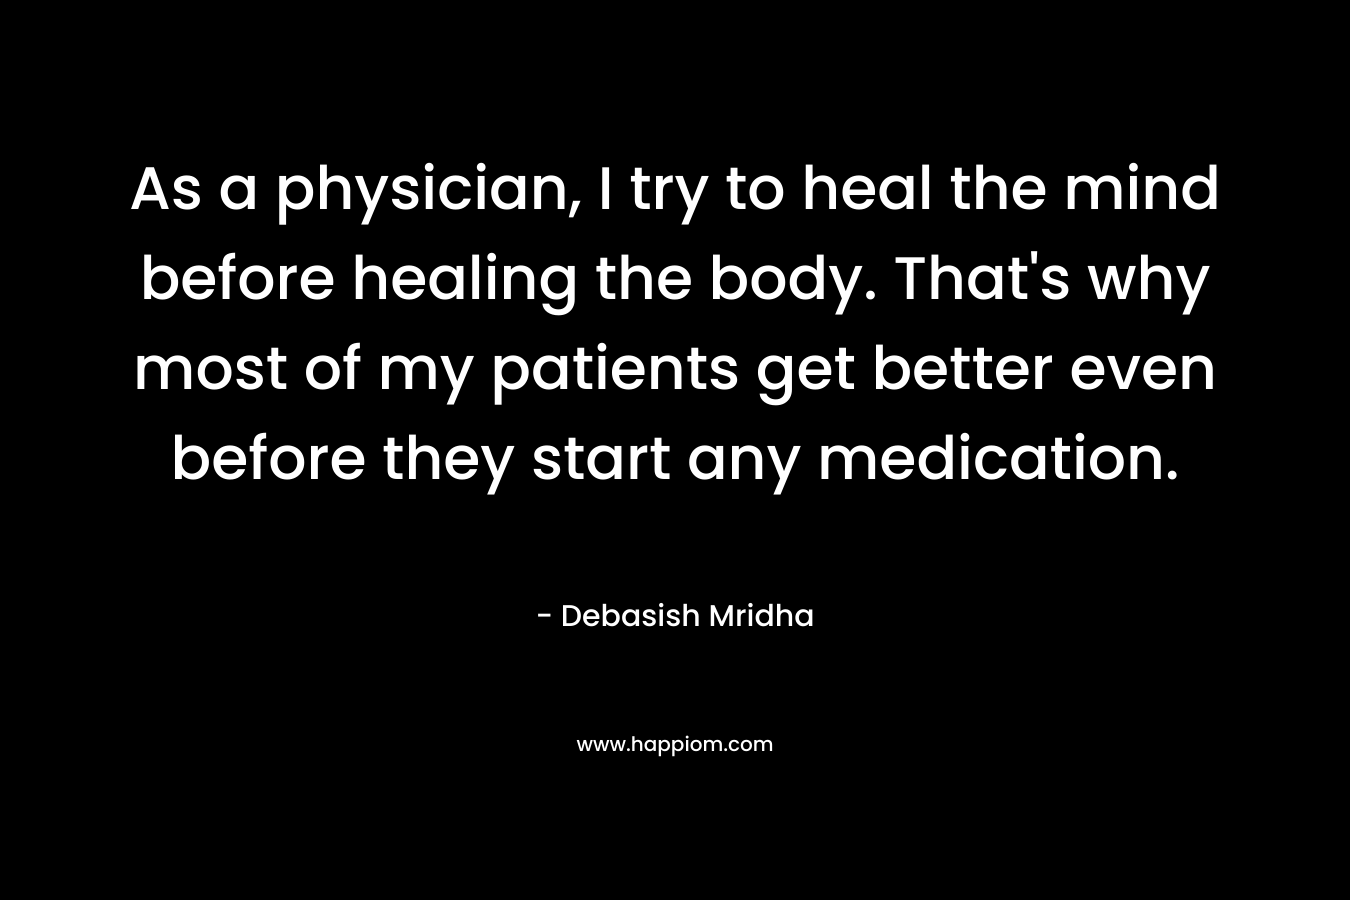 As a physician, I try to heal the mind before healing the body. That's why most of my patients get better even before they start any medication.